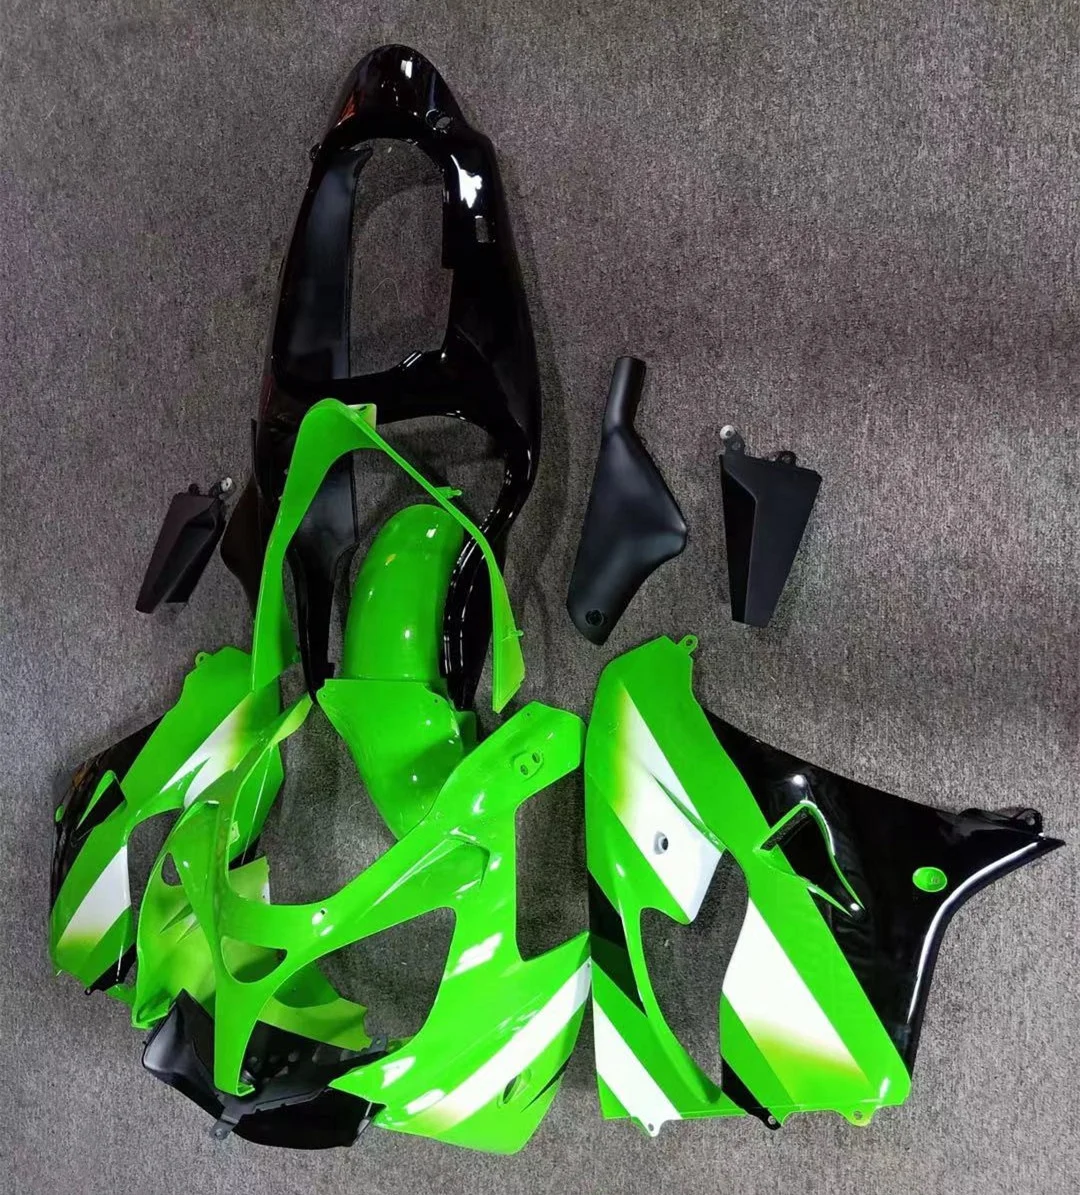 

2022 WHSC Green Motorcycle Accessories For KAWASAKI ZX-9R 2000-2001, Pictures shown